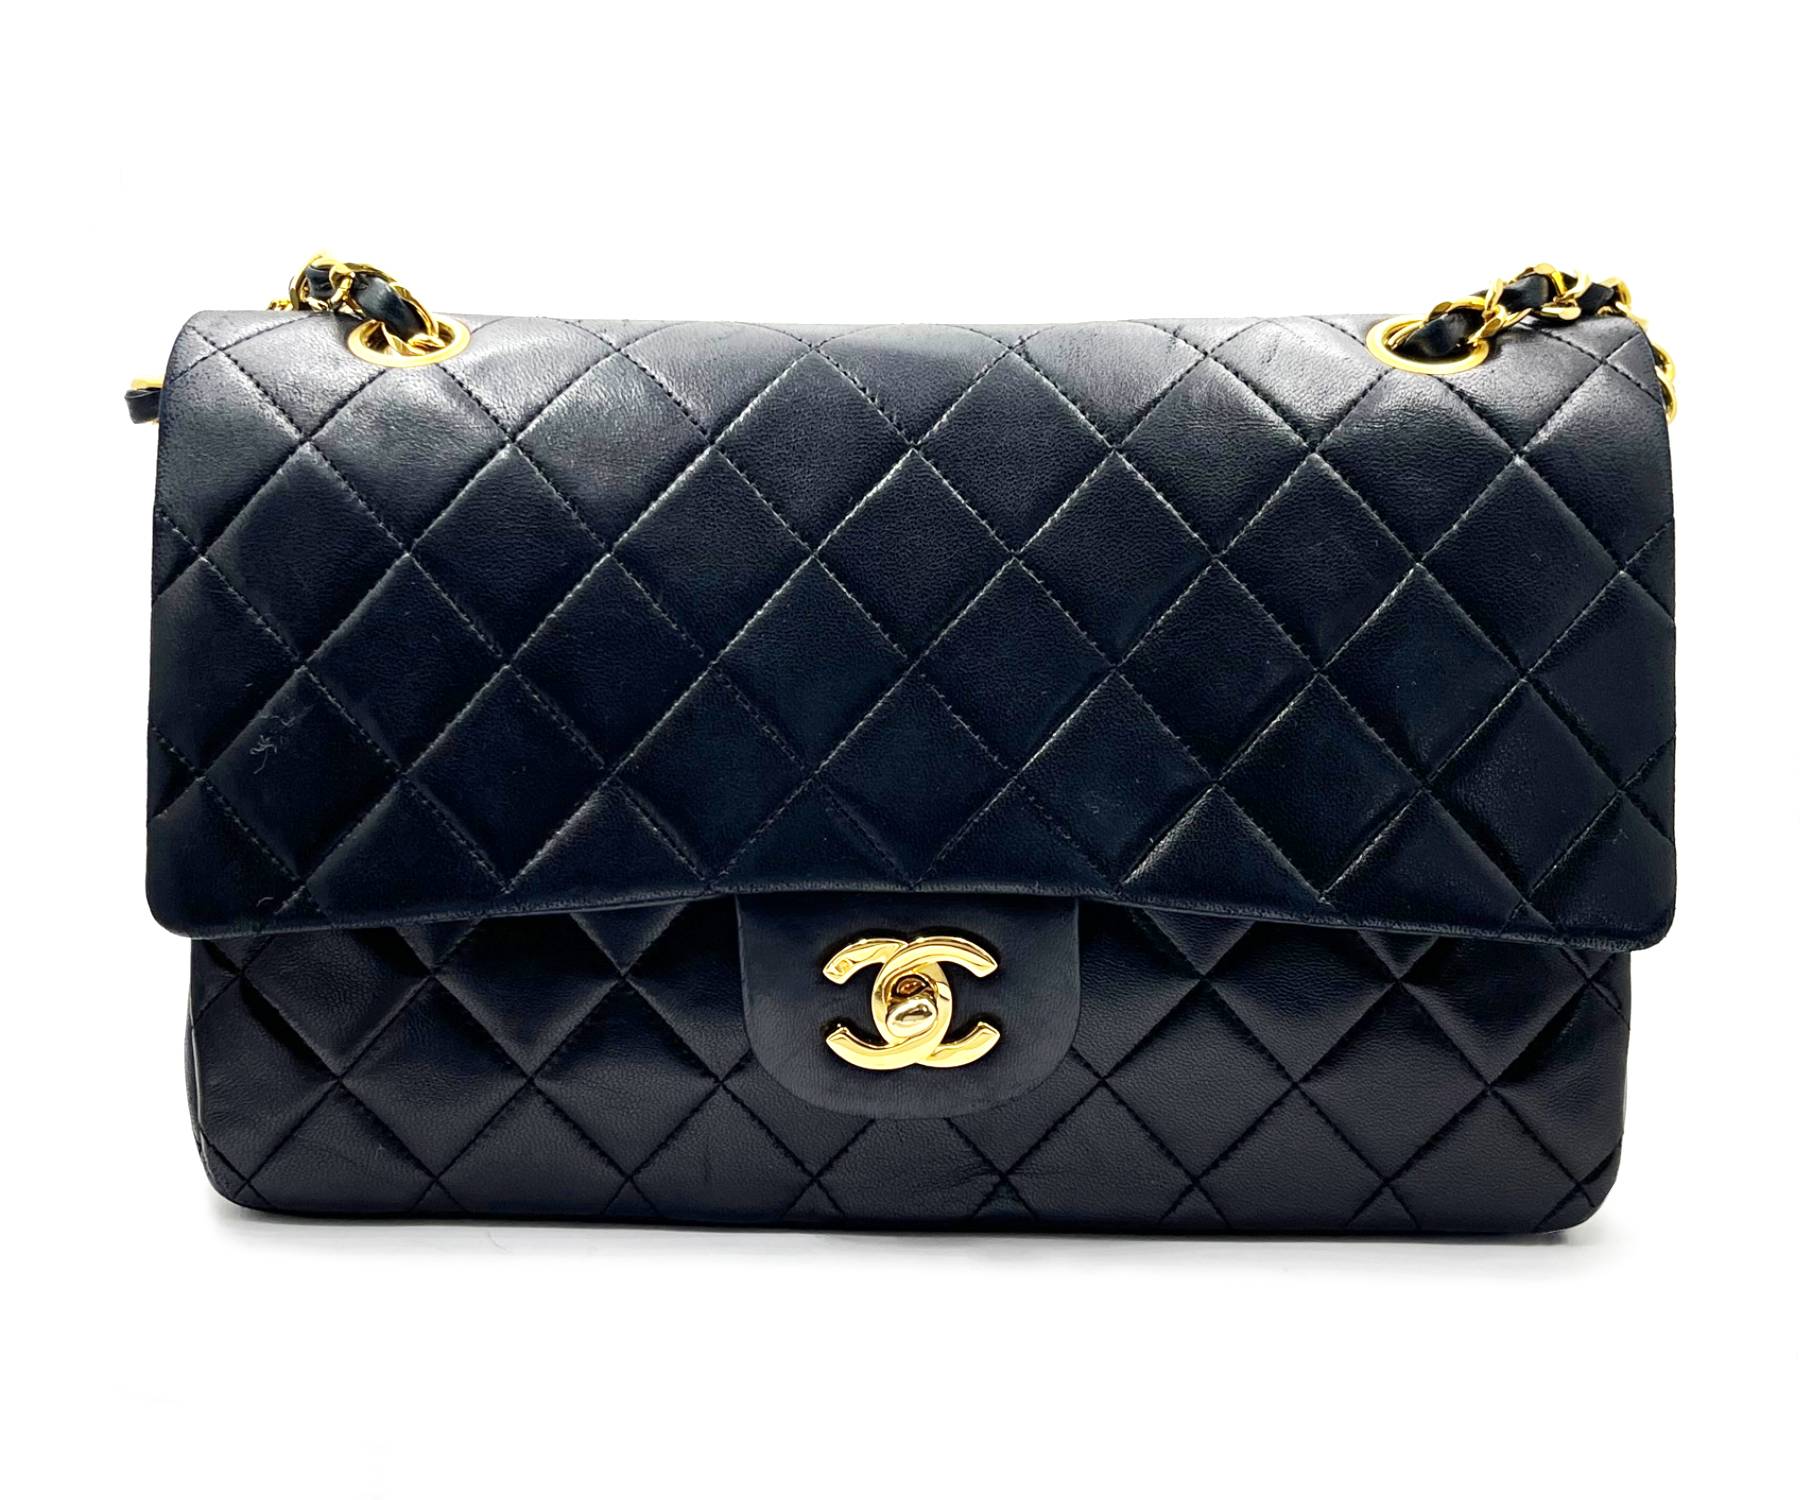 CHANEL Black Lambskin Quilted Leather 24K Gold Plated Shoulder Maxi/Jumbo Flap